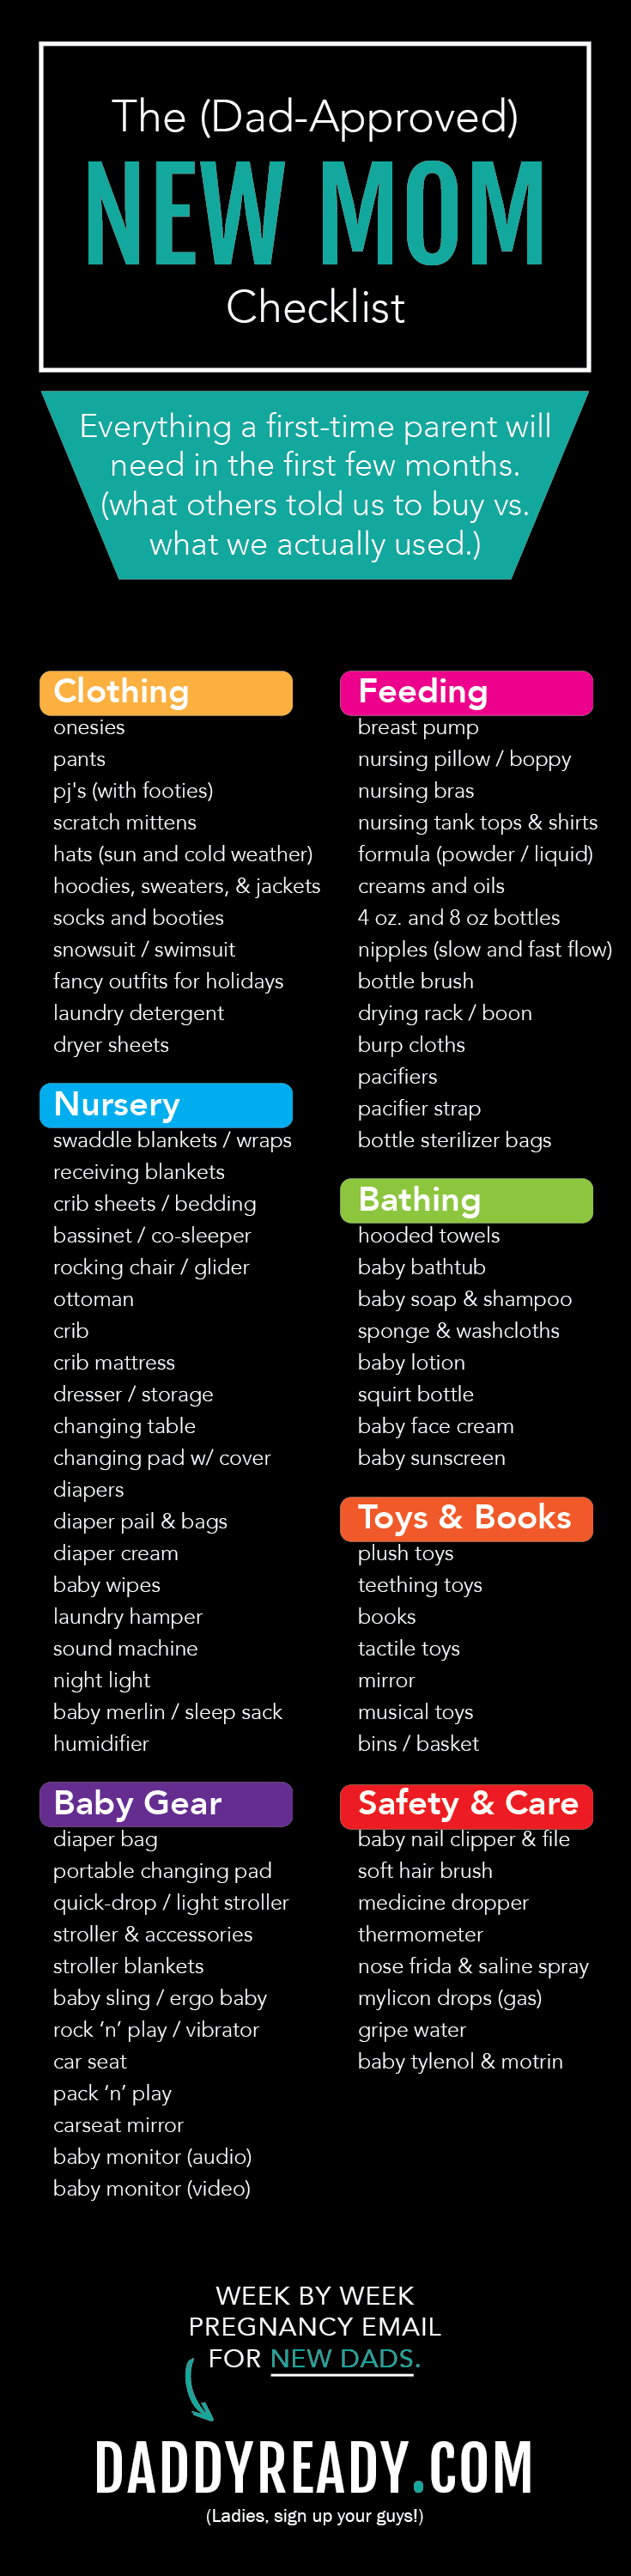 new baby checklist for new moms